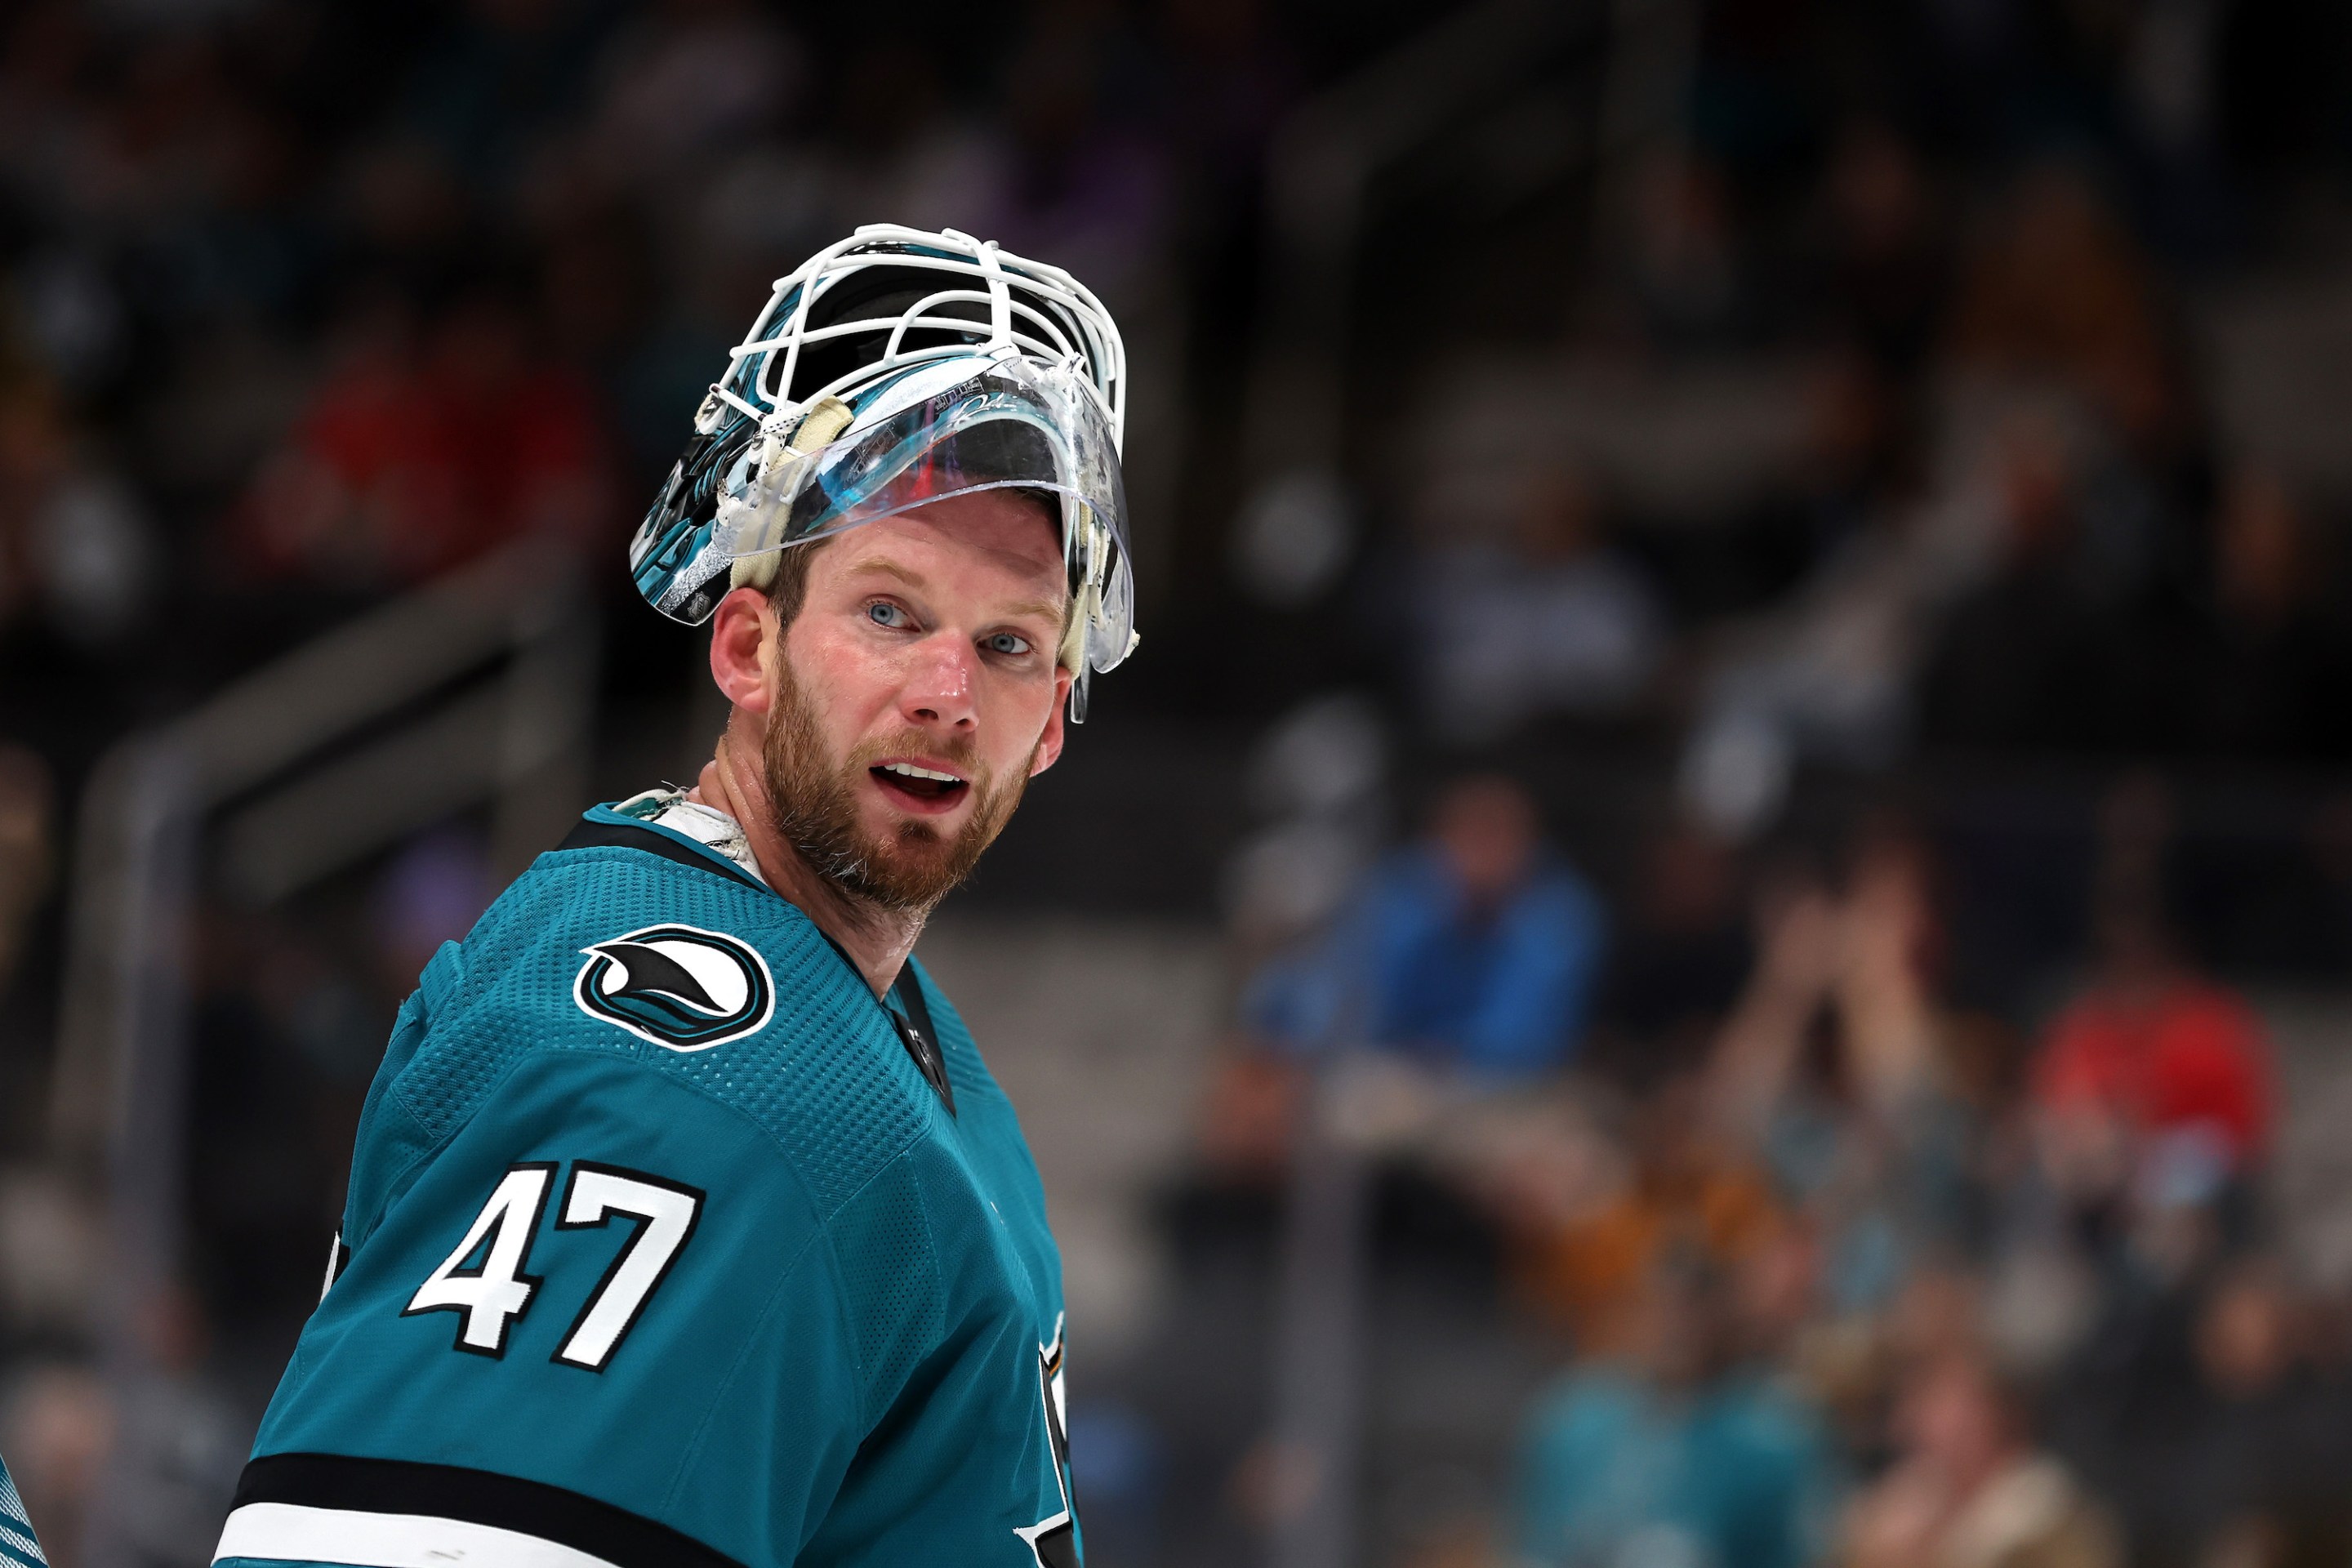 James Reimer #47 of the San Jose Sharks skates to the goal after a time out afl at SAP Center on November 03, 2022 in San Jose, California.